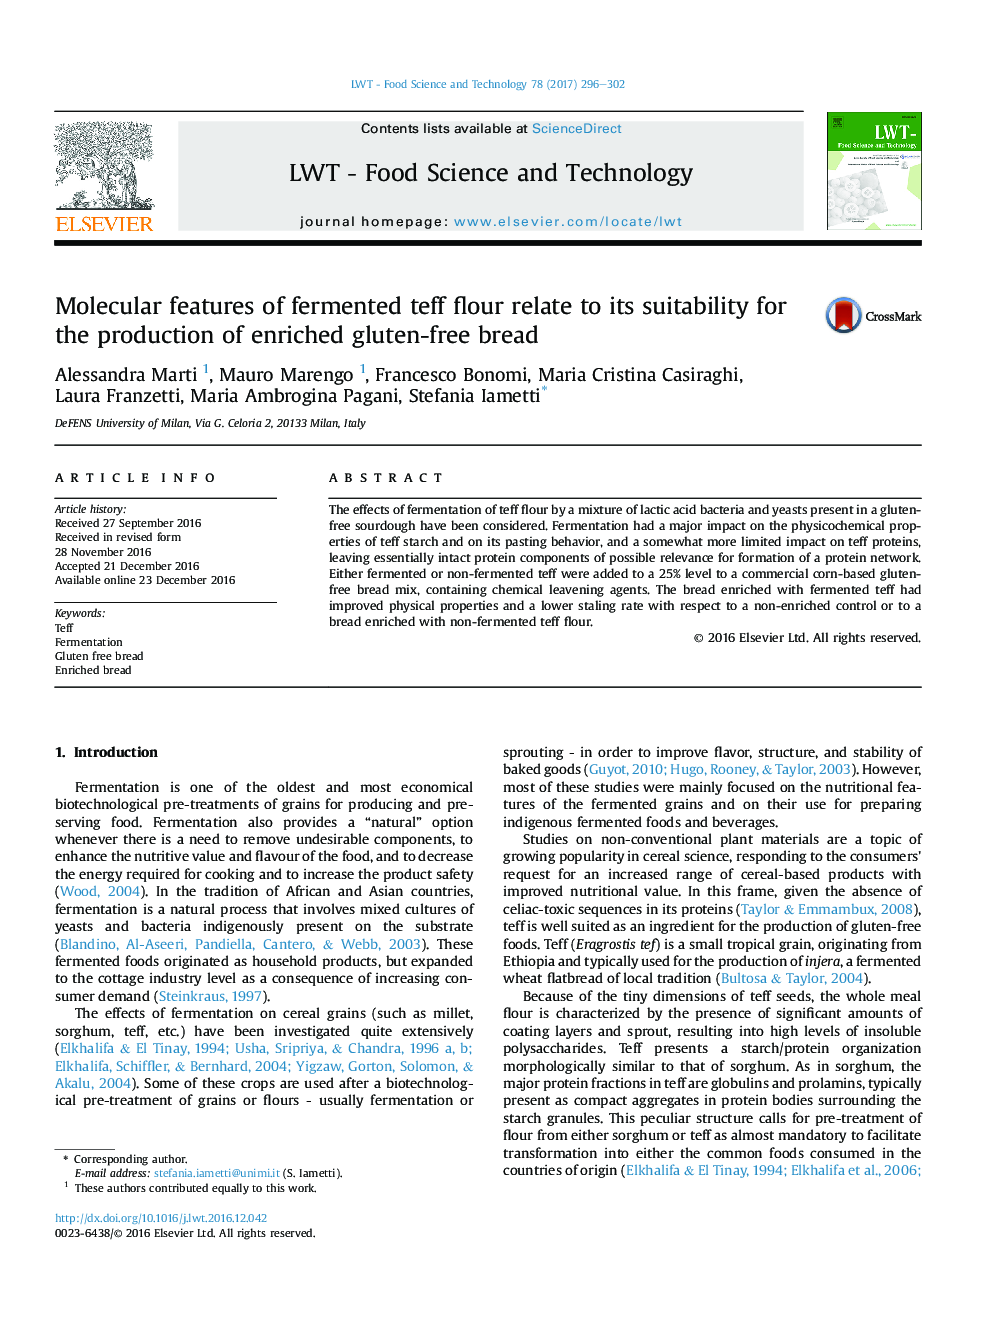 Molecular features of fermented teff flour relate to its suitability for the production of enriched gluten-free bread